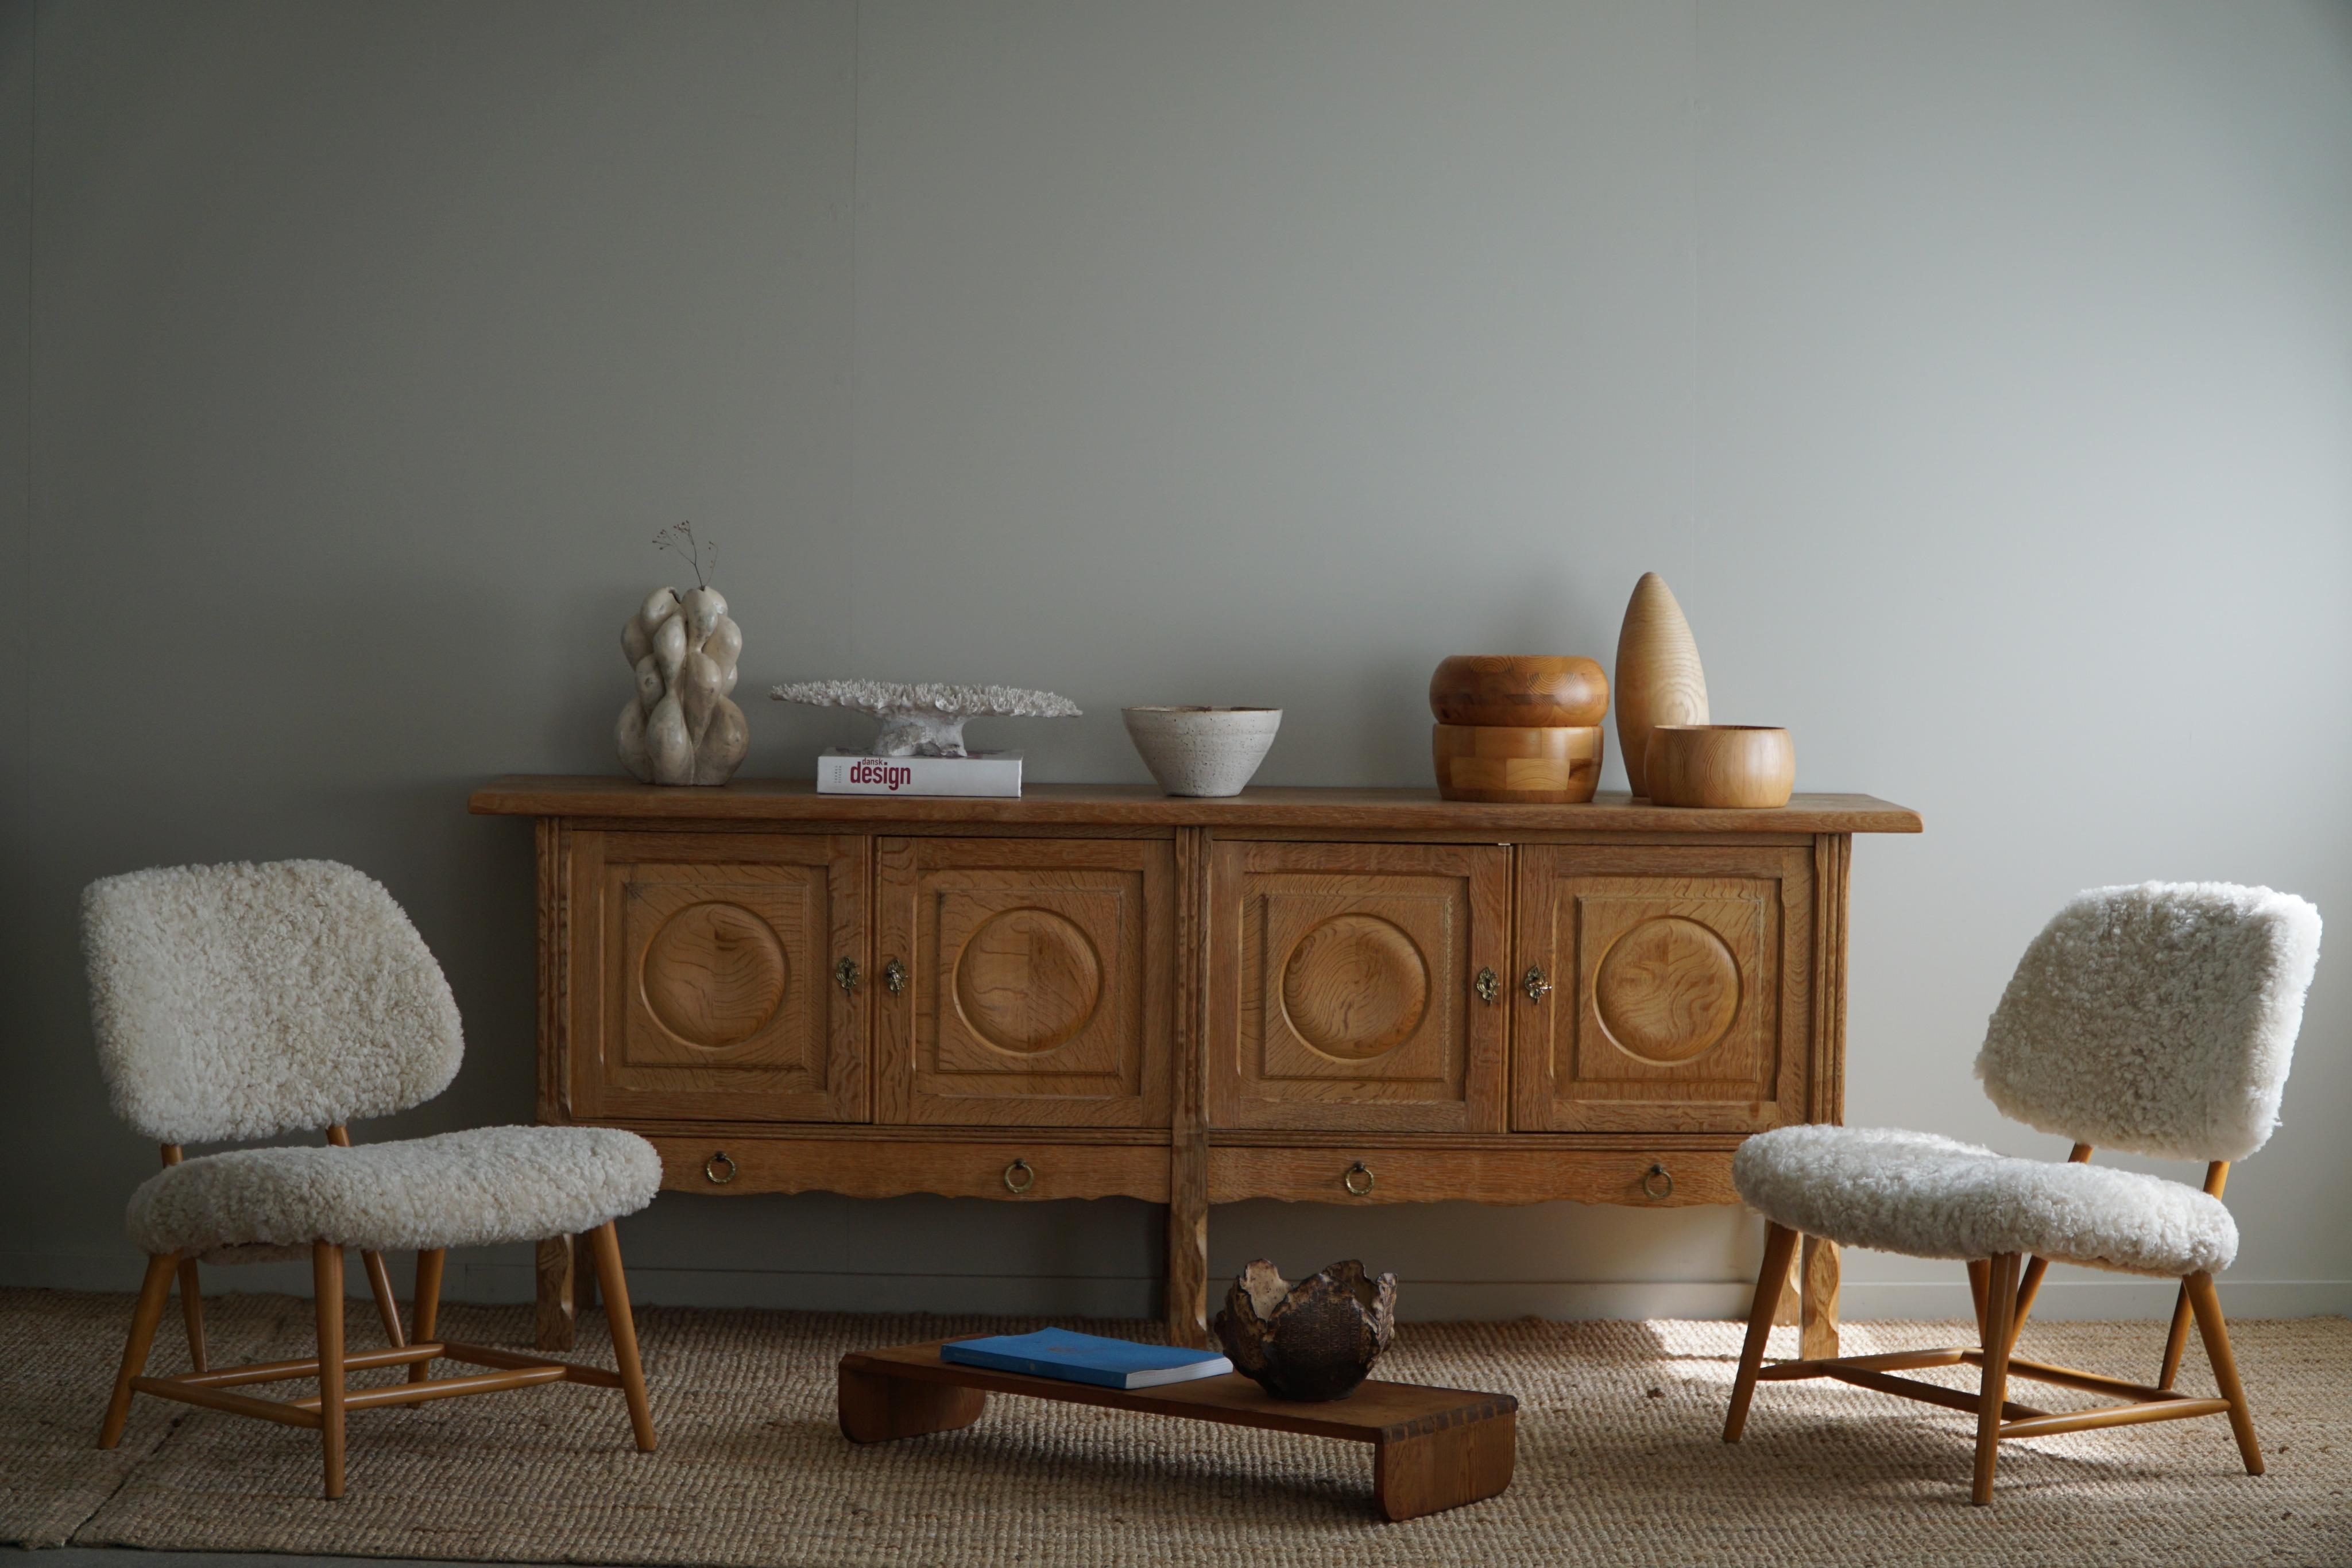 Fantastic low Classic sideboard in solid oak. Made by a Danish Cabinetmaker, Anker Sørensen in 1960s. This piece is in a good vintage condition, with some signs of wear on the top surface.

This brutalist object will fit into many interior styles.